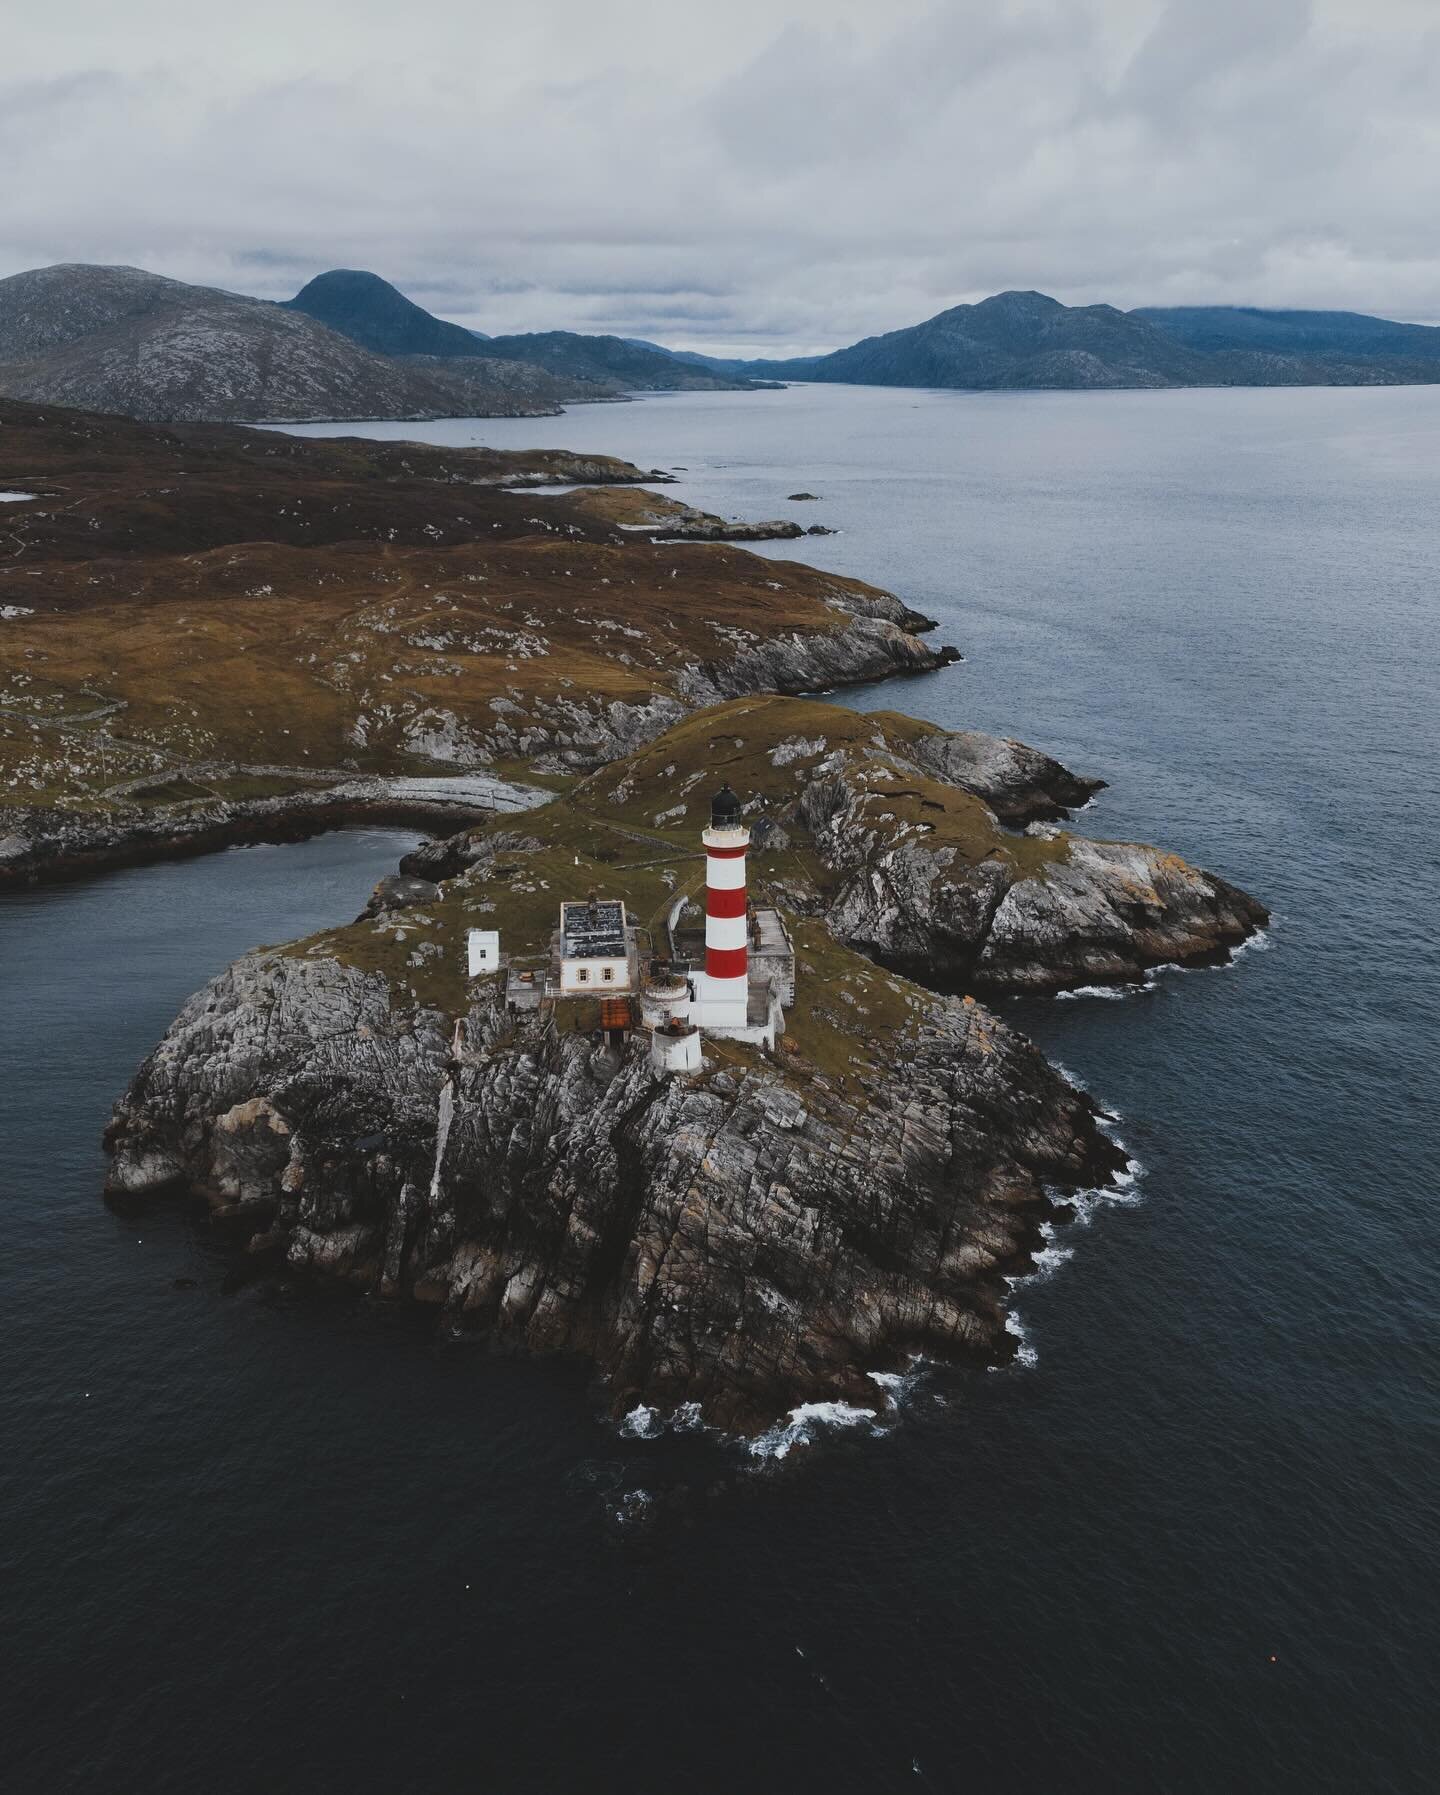 E I L E E N  G L A S  L I G H T H O U S E 

Guiding the way through rugged beauty. 🏴󠁧󠁢󠁳󠁣󠁴󠁿⚓ Every beam of this iconic lighthouse tells a story of resilience, just like the people of Harris. 

#LandscapePhotography
#ScotlandScenery
#IsleOfSkyeV